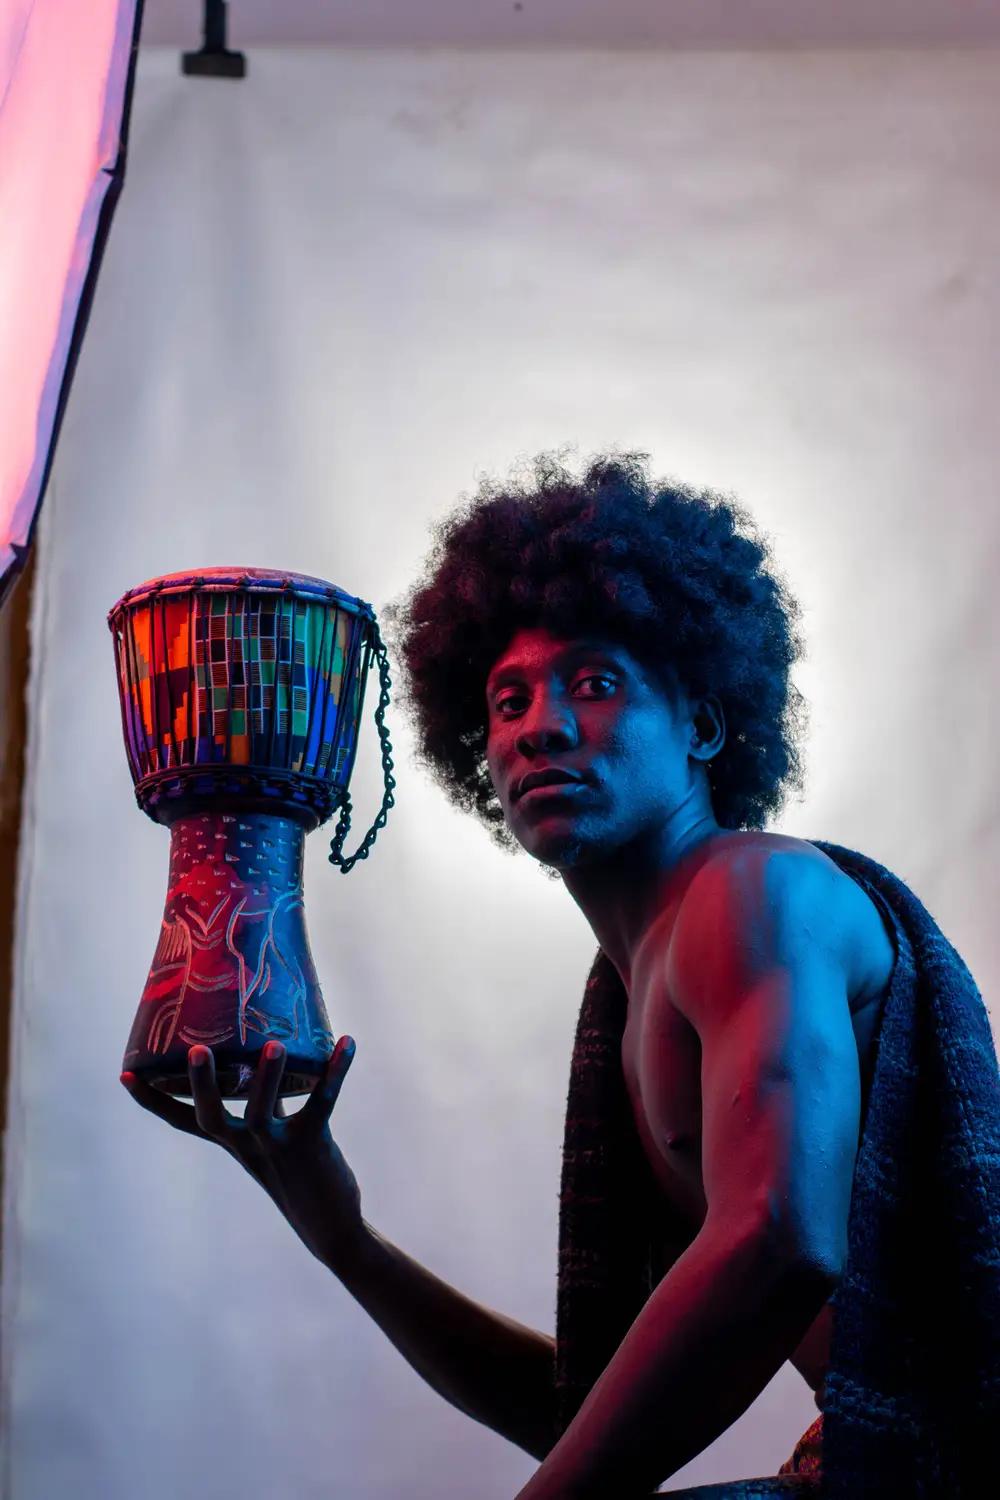 model on afro hairstyle holds his drum with one hand